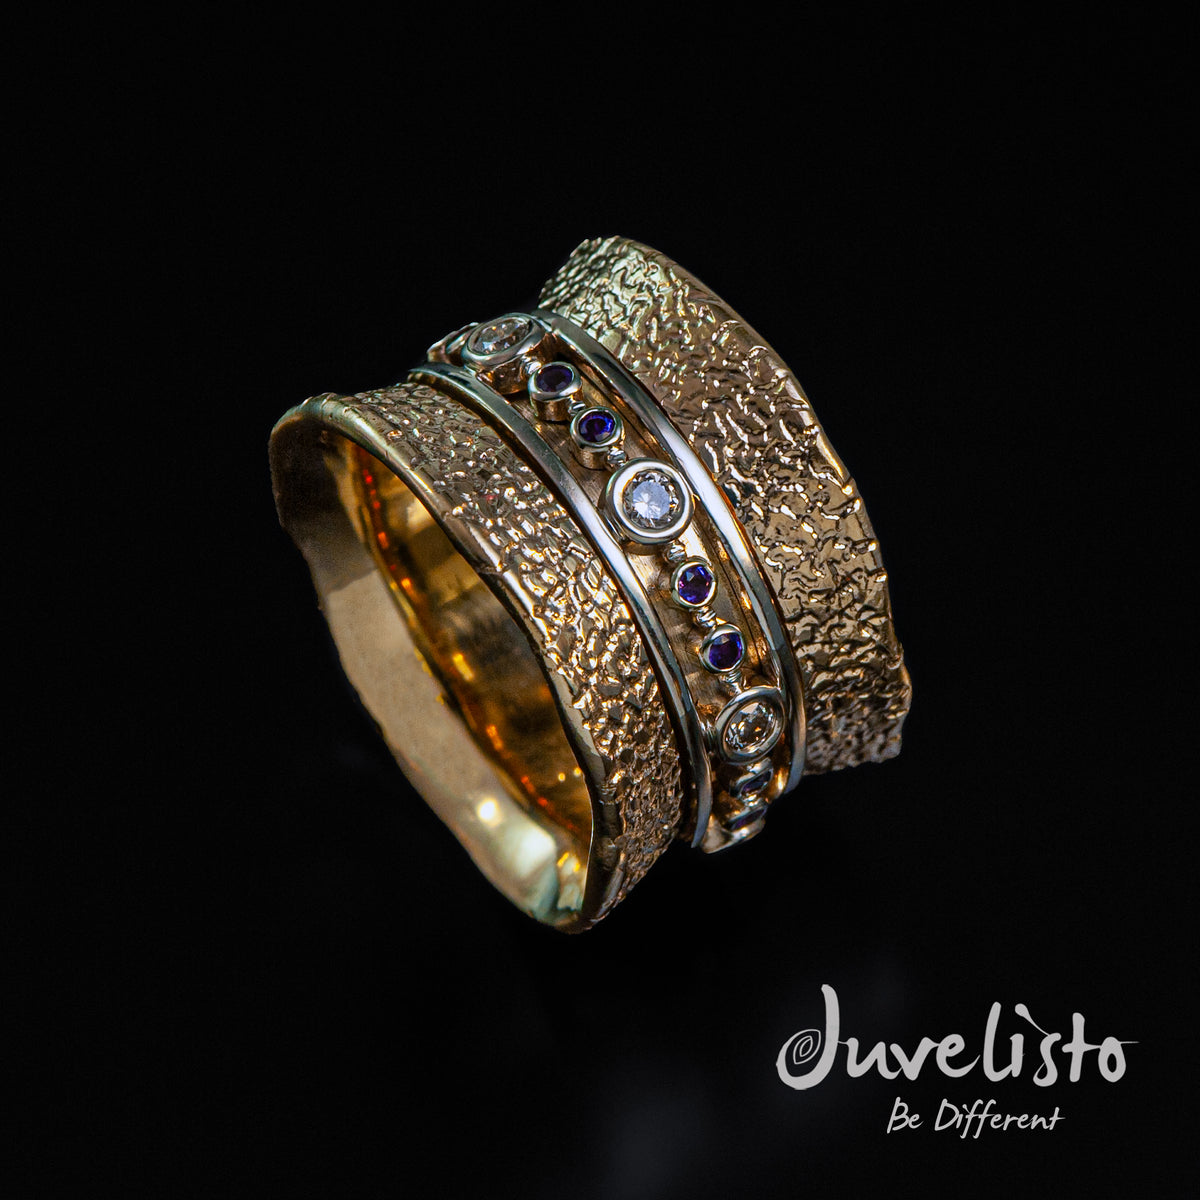 Juvelisto Design Vancouver - Meditation Spinner Ring in gold with Diamonds and Amethysts